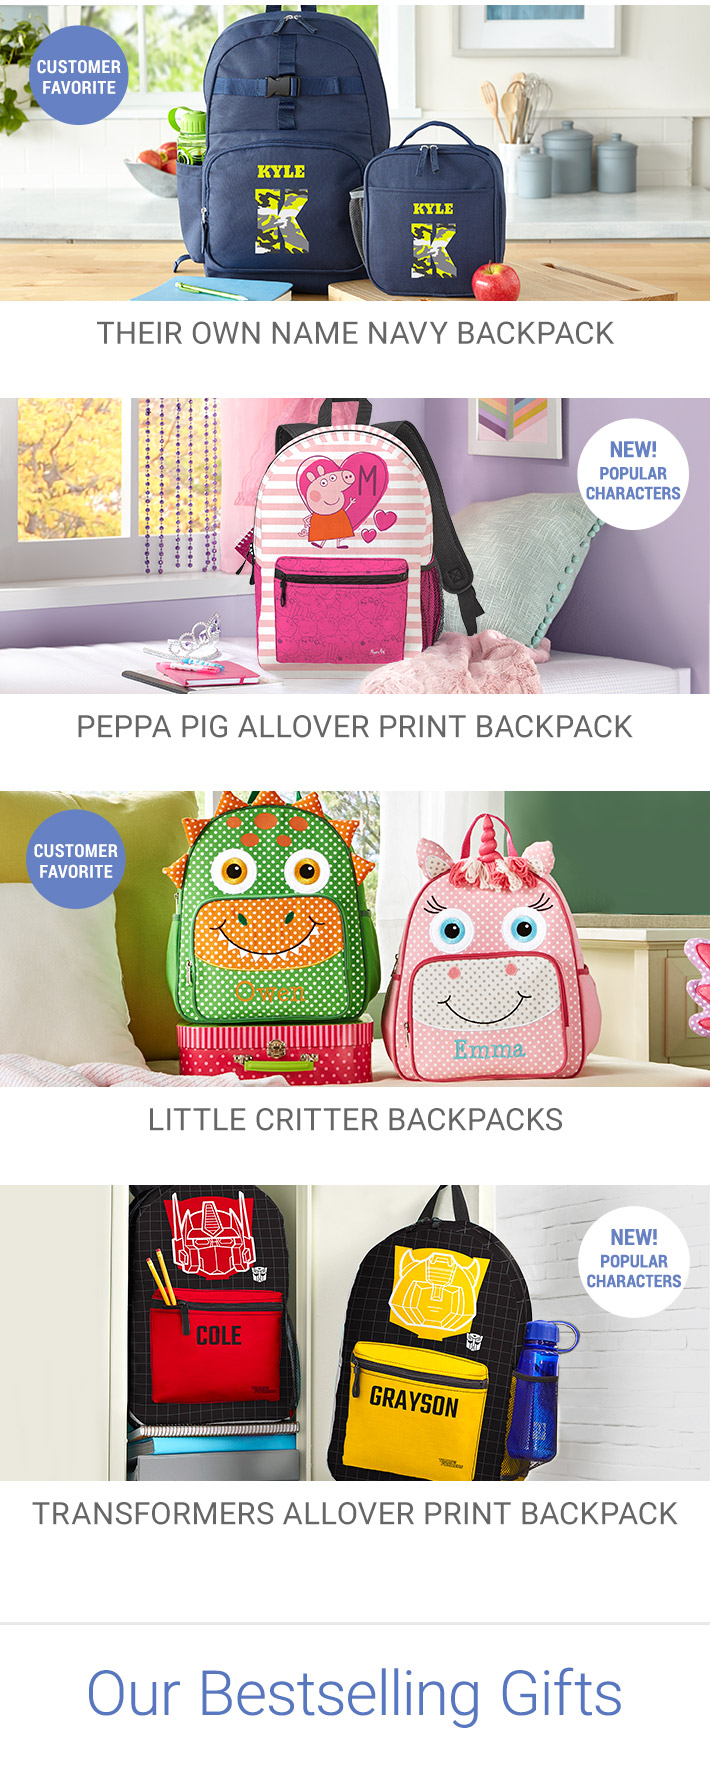 https://static.personalcreations.com/personalcreations/siteimages/pcr_c_her_480x1600_bts23_sit_01_backpacks.jpg